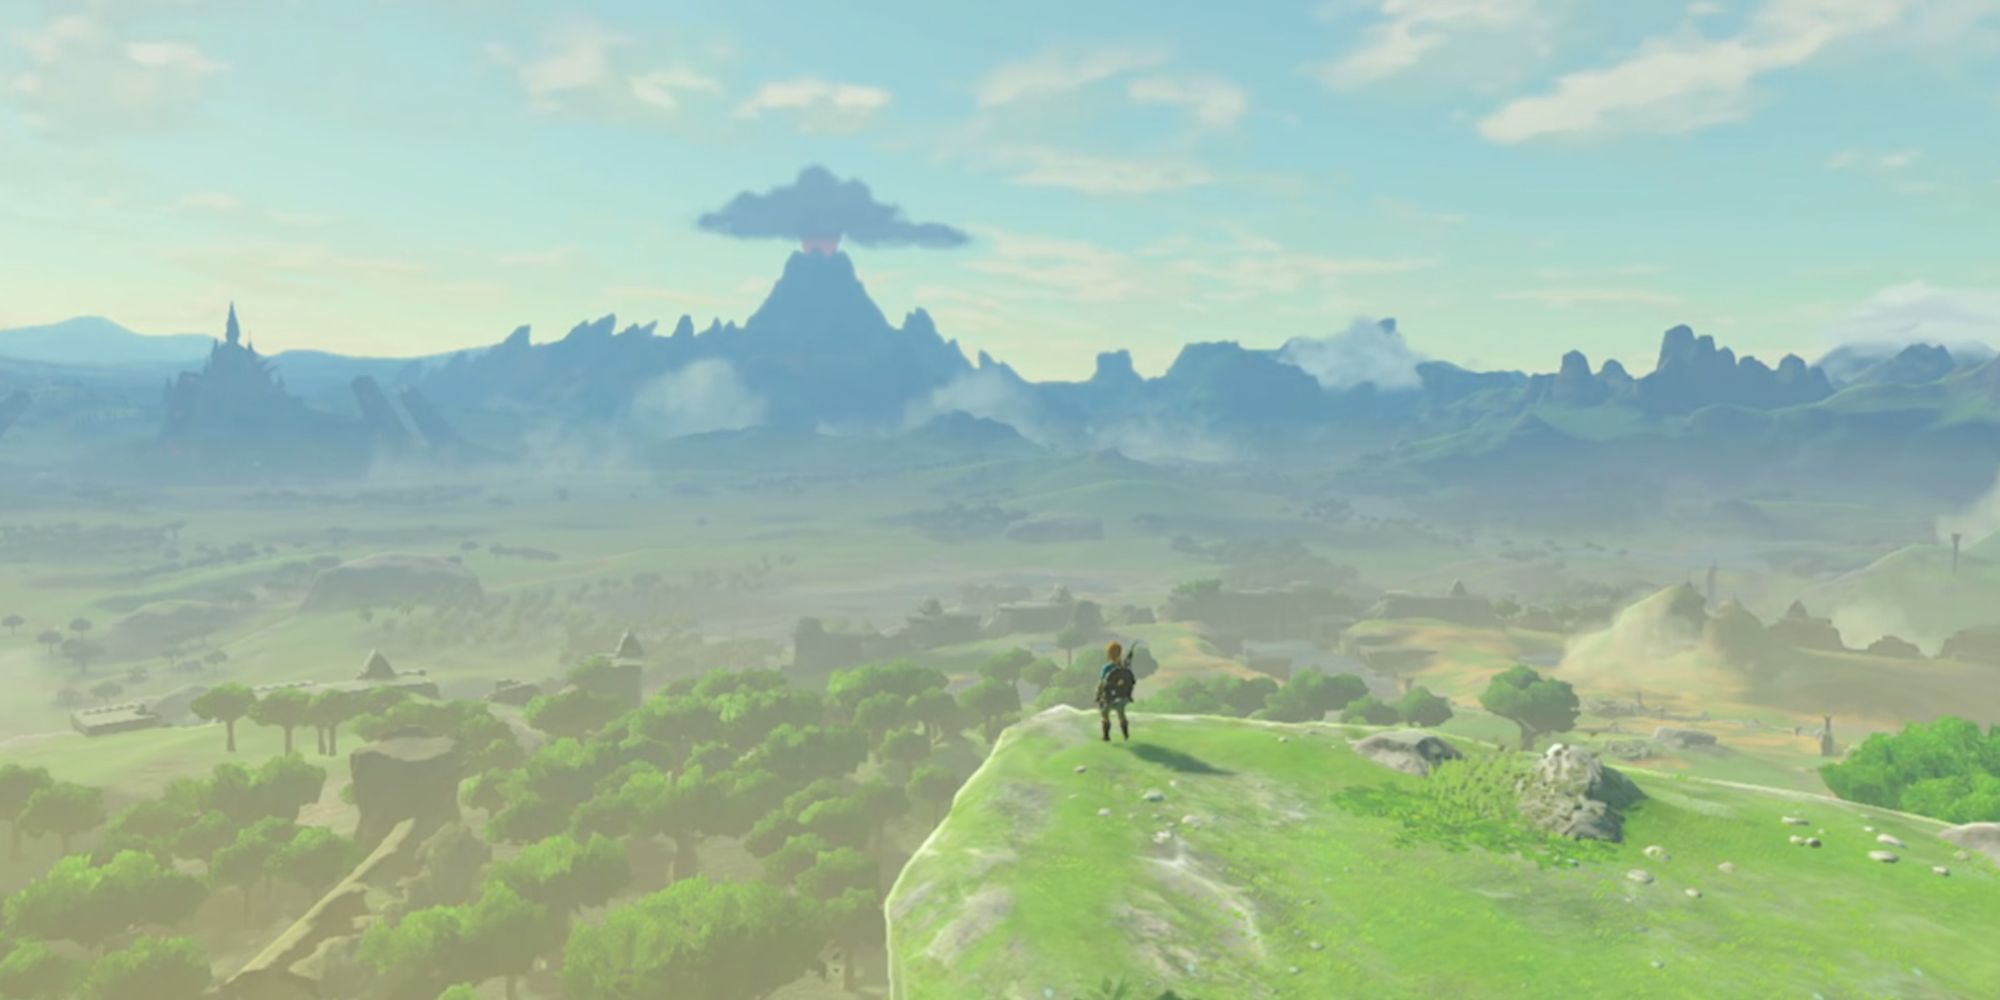 Link stands on a grassy cliff looking over the kingdom of Hyrule in The Legend of Zelda: Breath of the Wild Opening